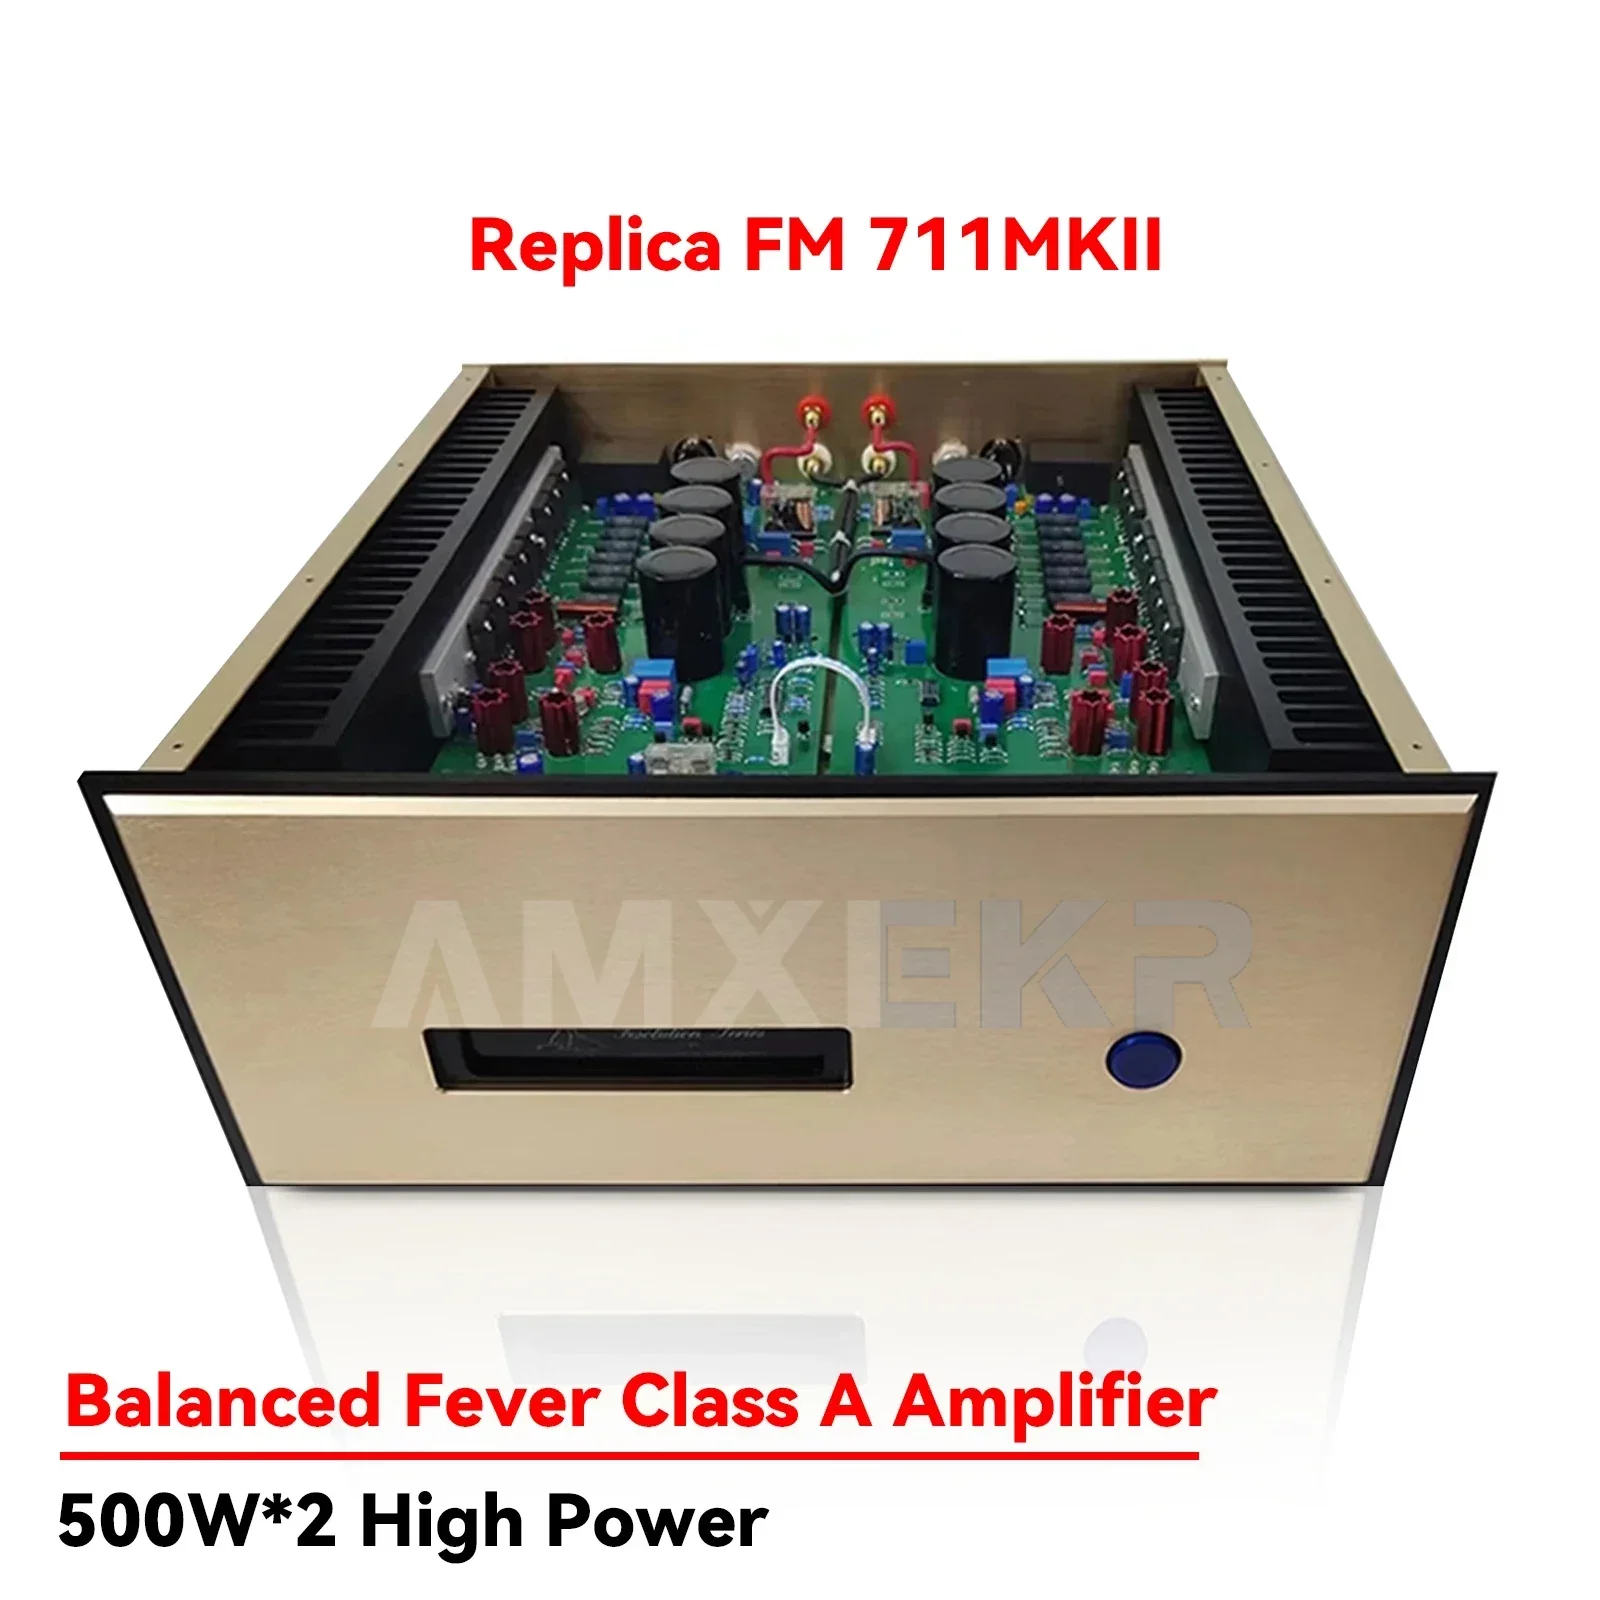 

AMXEKR Reproduction FM711 MKII Power Amplifier Class AB 250W*2 HiFi Home High-end Power Amplifier 1:1 Reproduction 100dB